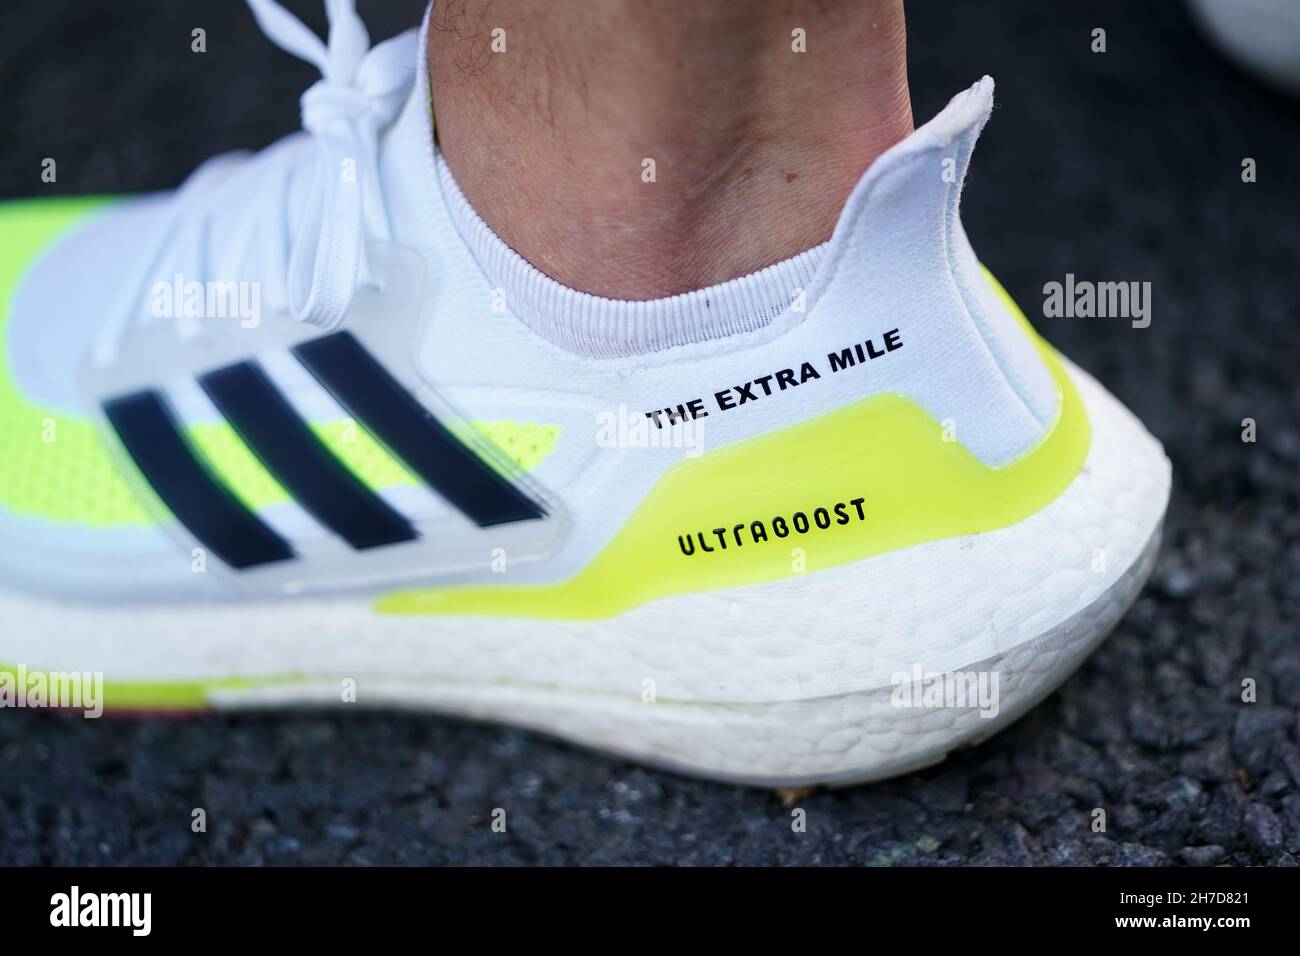 The custom Adidas Ultraboost trainers worn by Kevin Sinfield during the Extra Mile Challenge from the Mattioli Woods Welford Road Stadium in Leicester to the Emerald Headingley Stadium in Leeds. Picture date: Monday November 22, 2021. Stock Photo